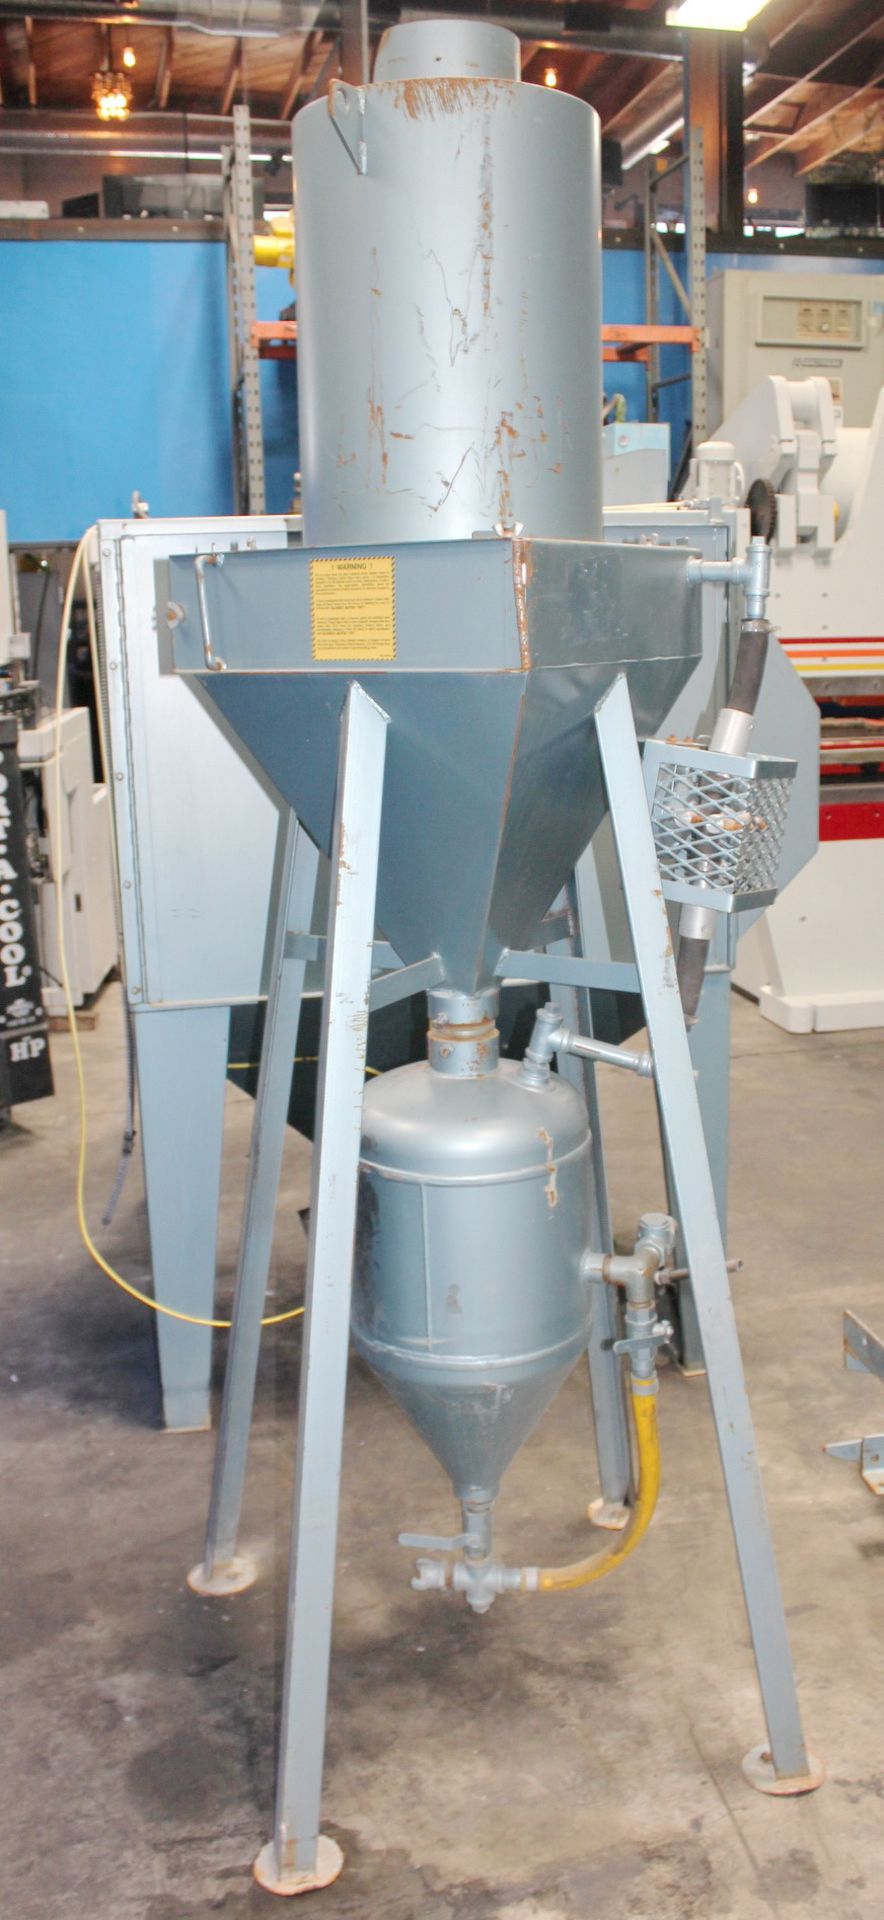 Universal Suction Type Blast Cabinet & Dust Collector | 60" x 48" x 36", Mdl: 60x48x36PDH-DC200, S/ - Image 10 of 20